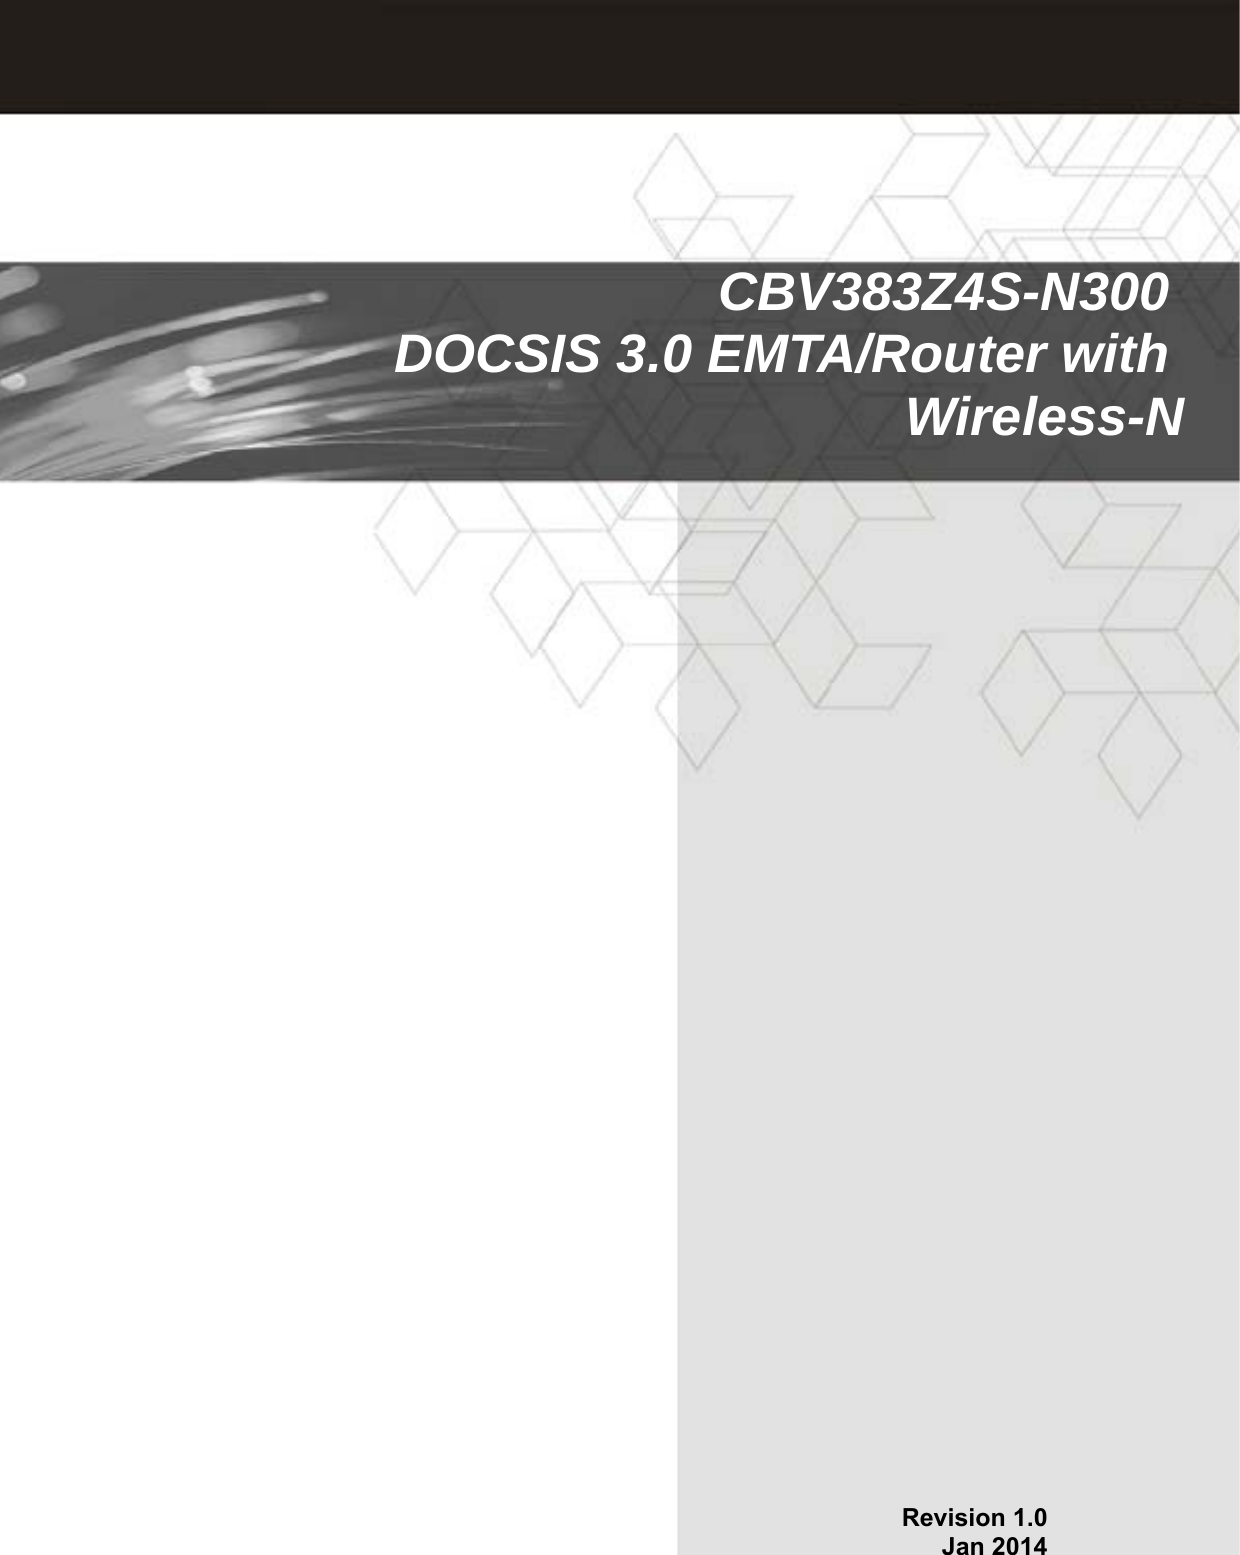   Revision 1.0 Jan 2014CBV383Z4S-N300   DOCSIS 3.0 EMTA/Router with Wireless-N